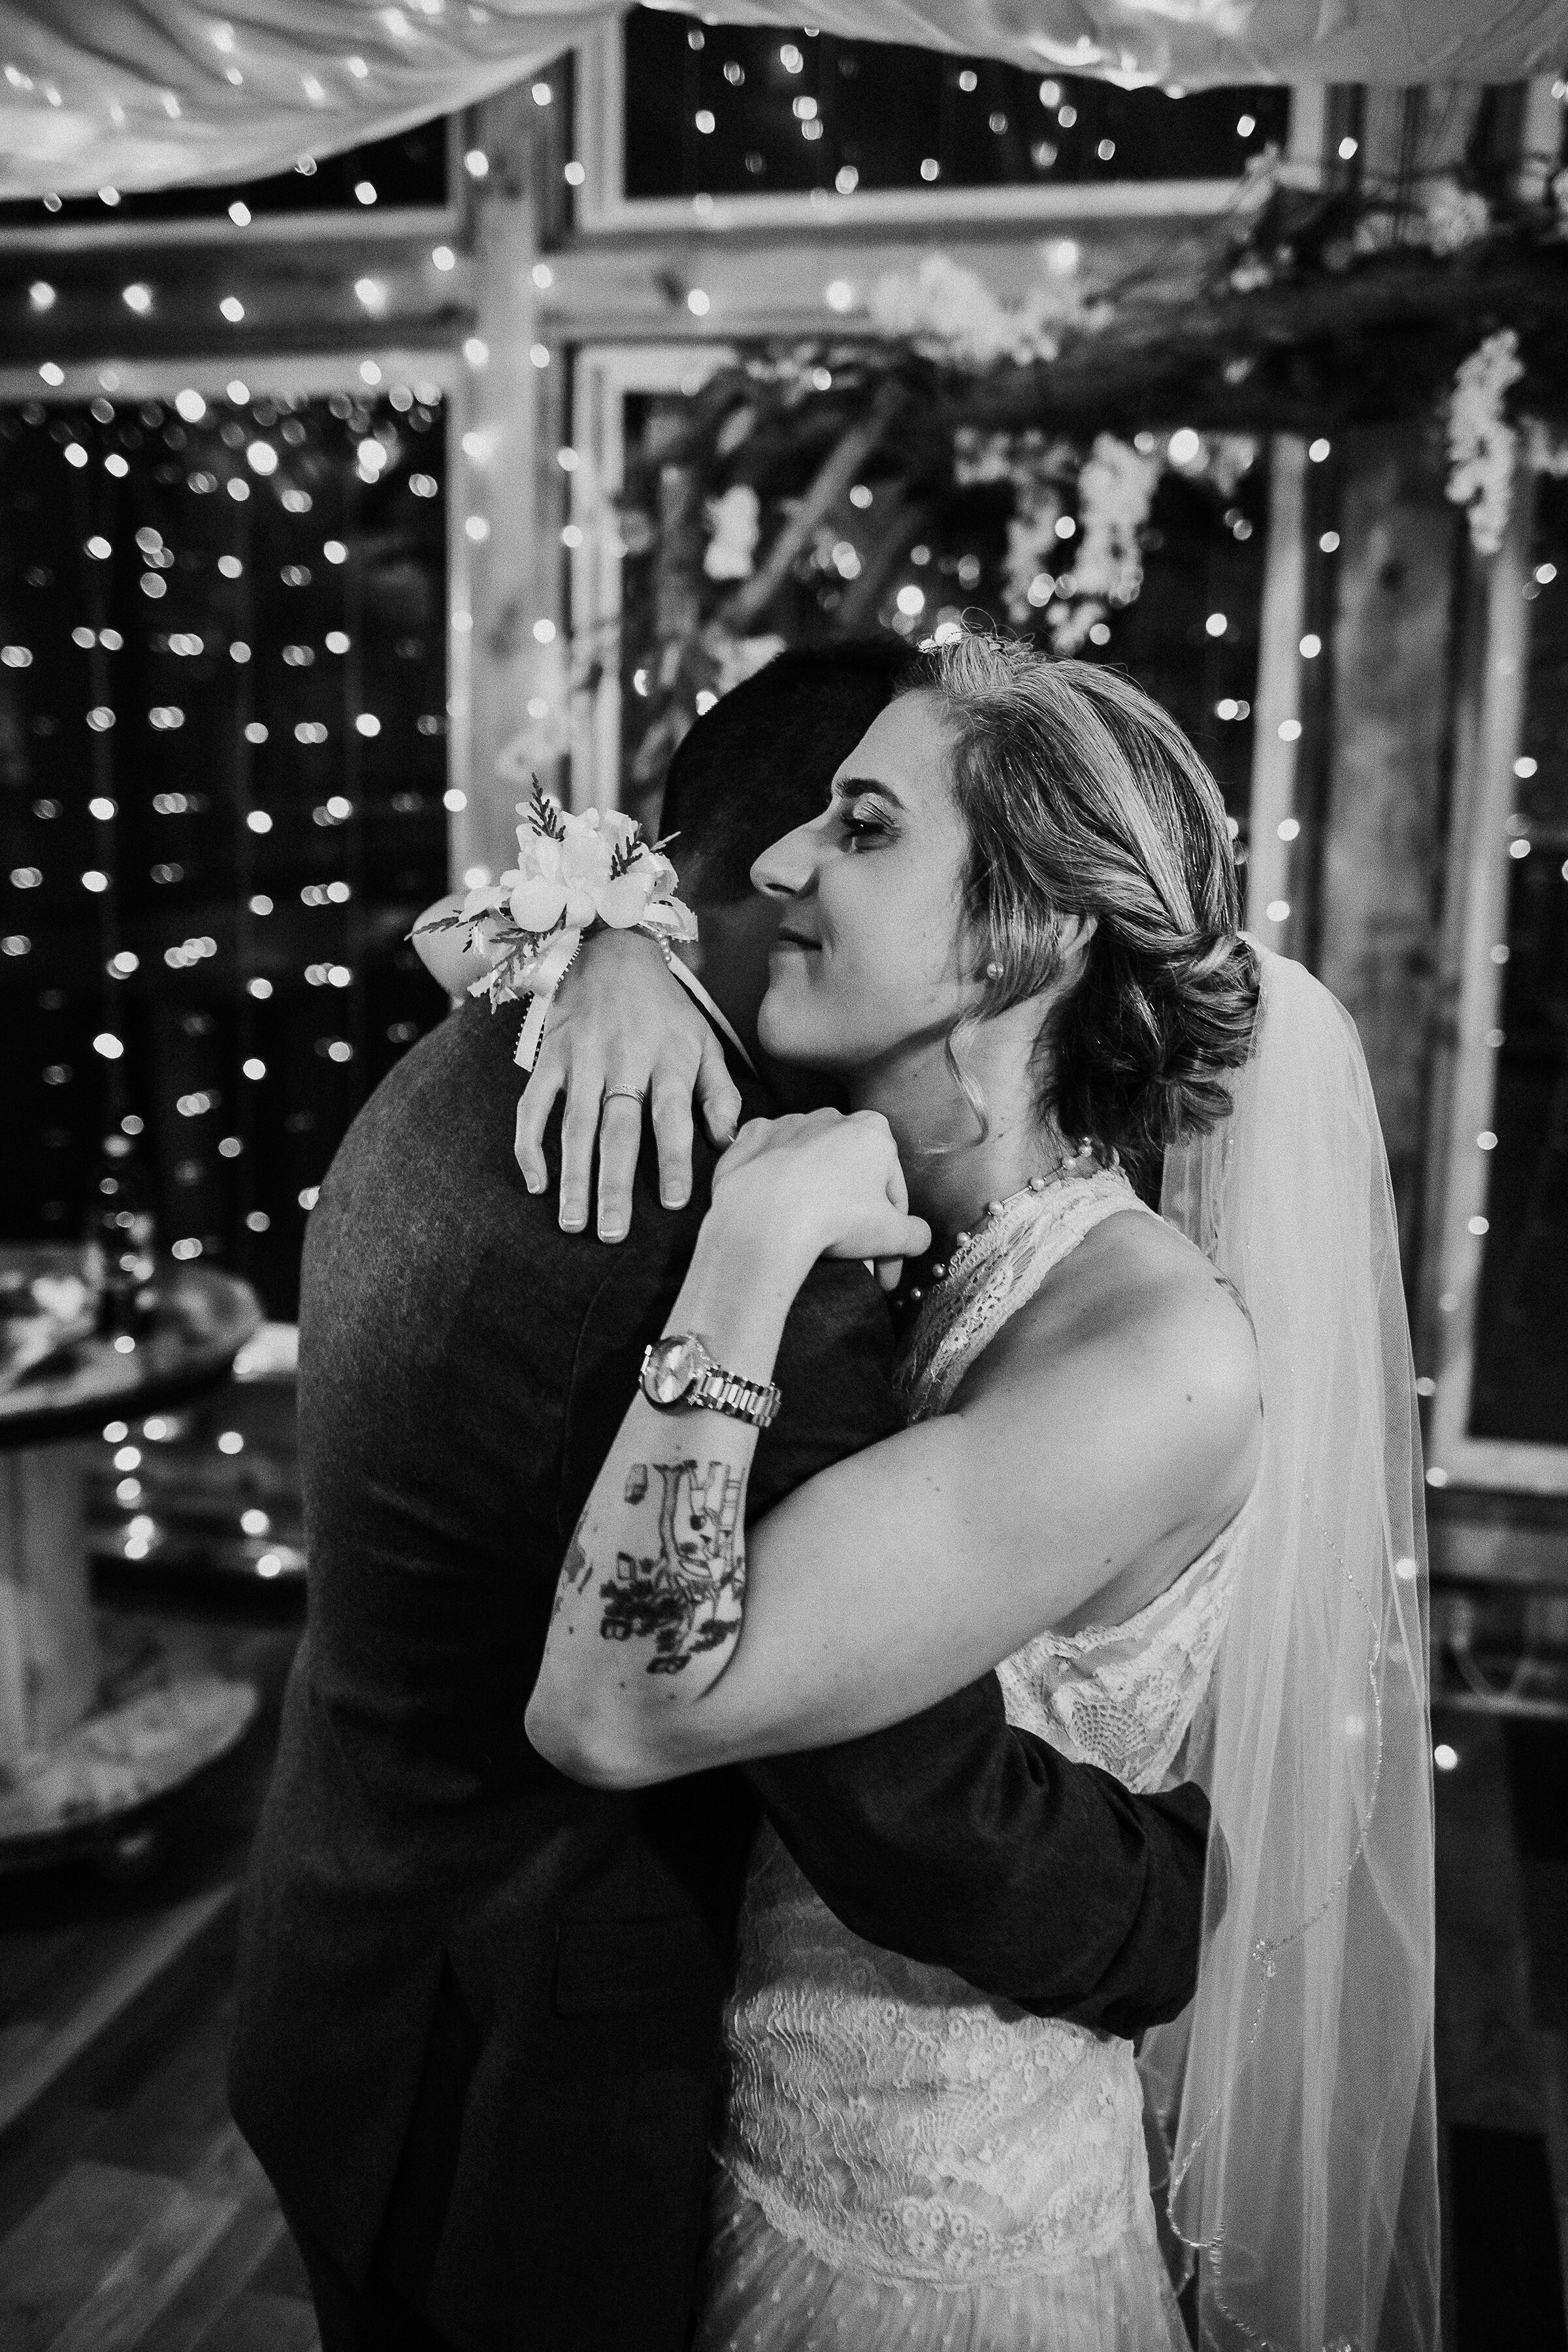  String lights, starry sky and slow dancing captured by Kindred + Co. Photography make for a romantic treehouse elopement in Colombus, Ohio. lace wedding dress, gray tweed wedding suit, bohemian bride, natural wedding makeup , wedding corsage, slow d